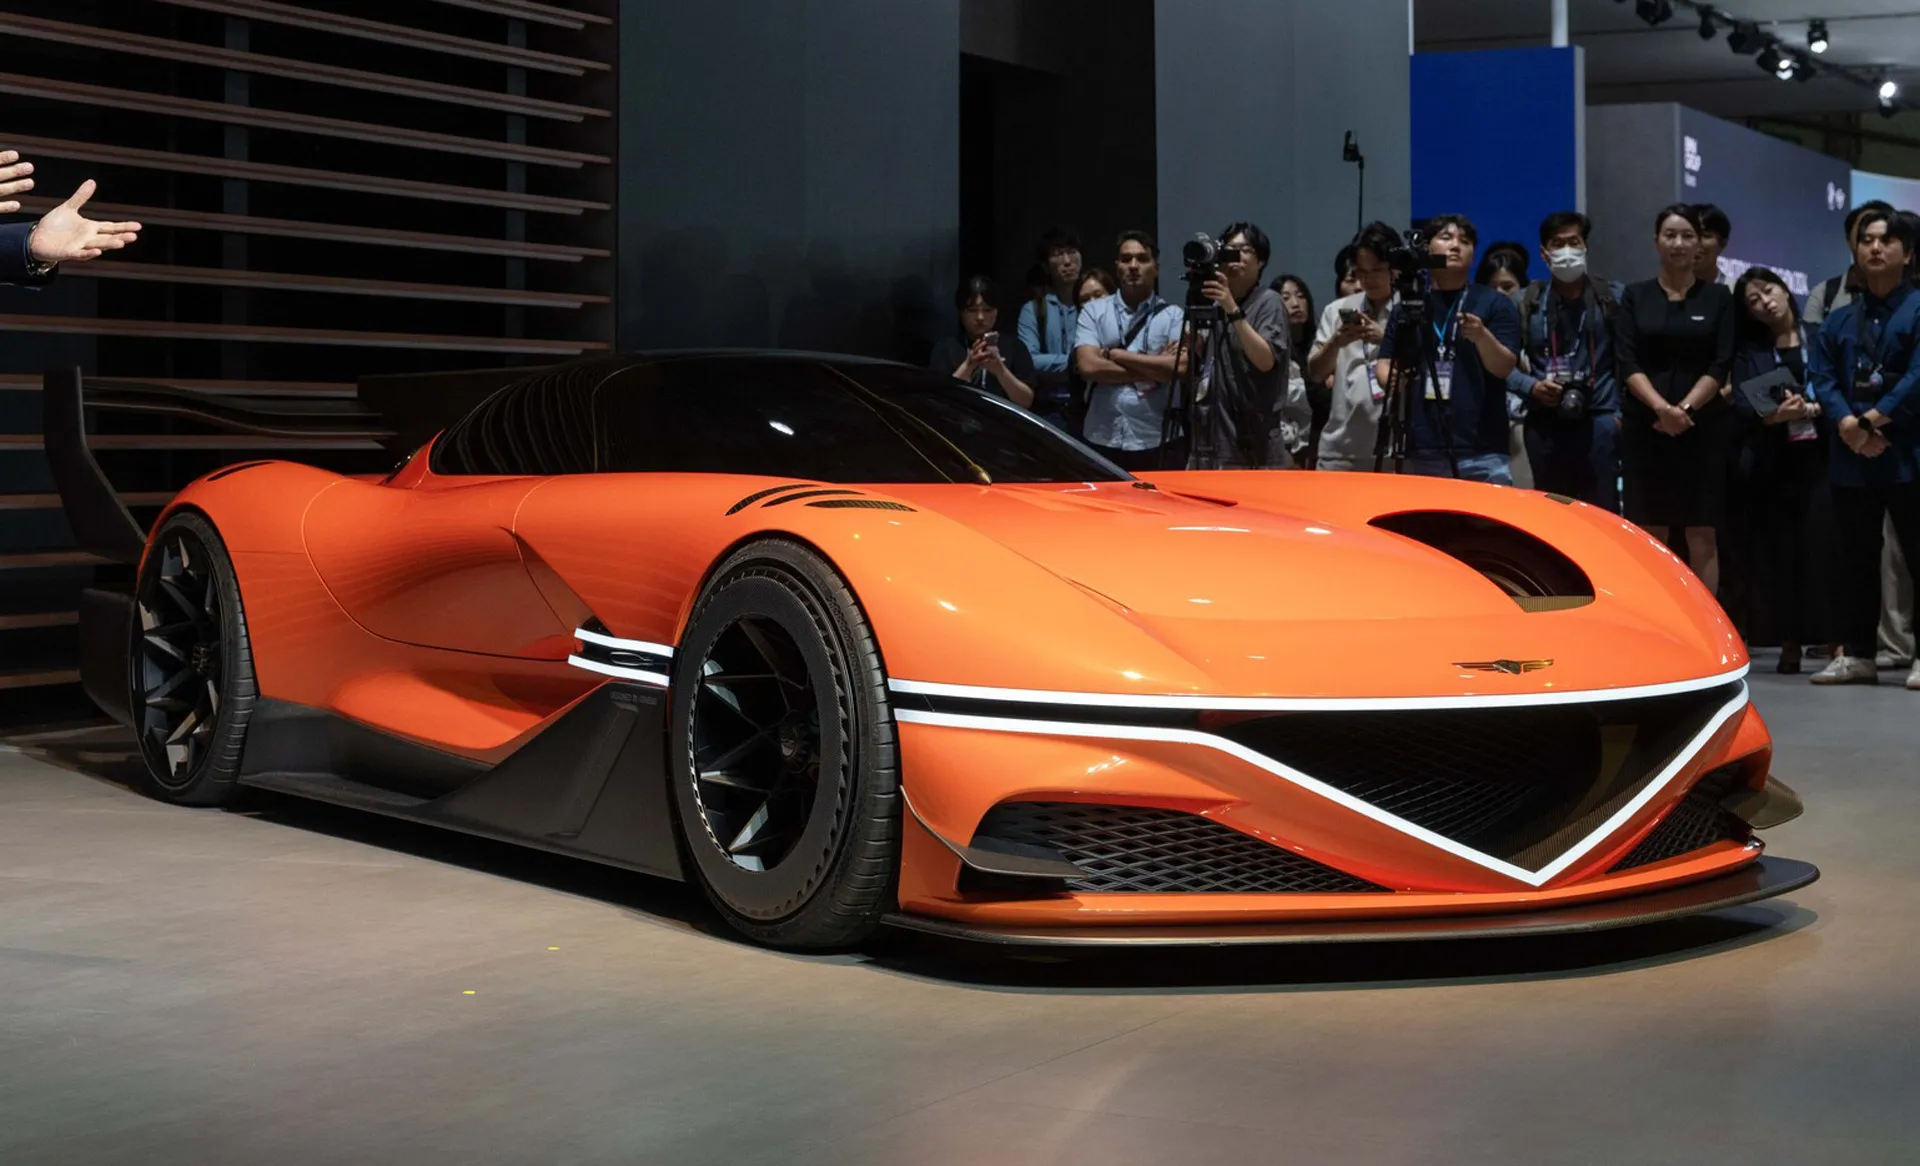 Genesis turns its hypercar concept into a race car Auto Recent